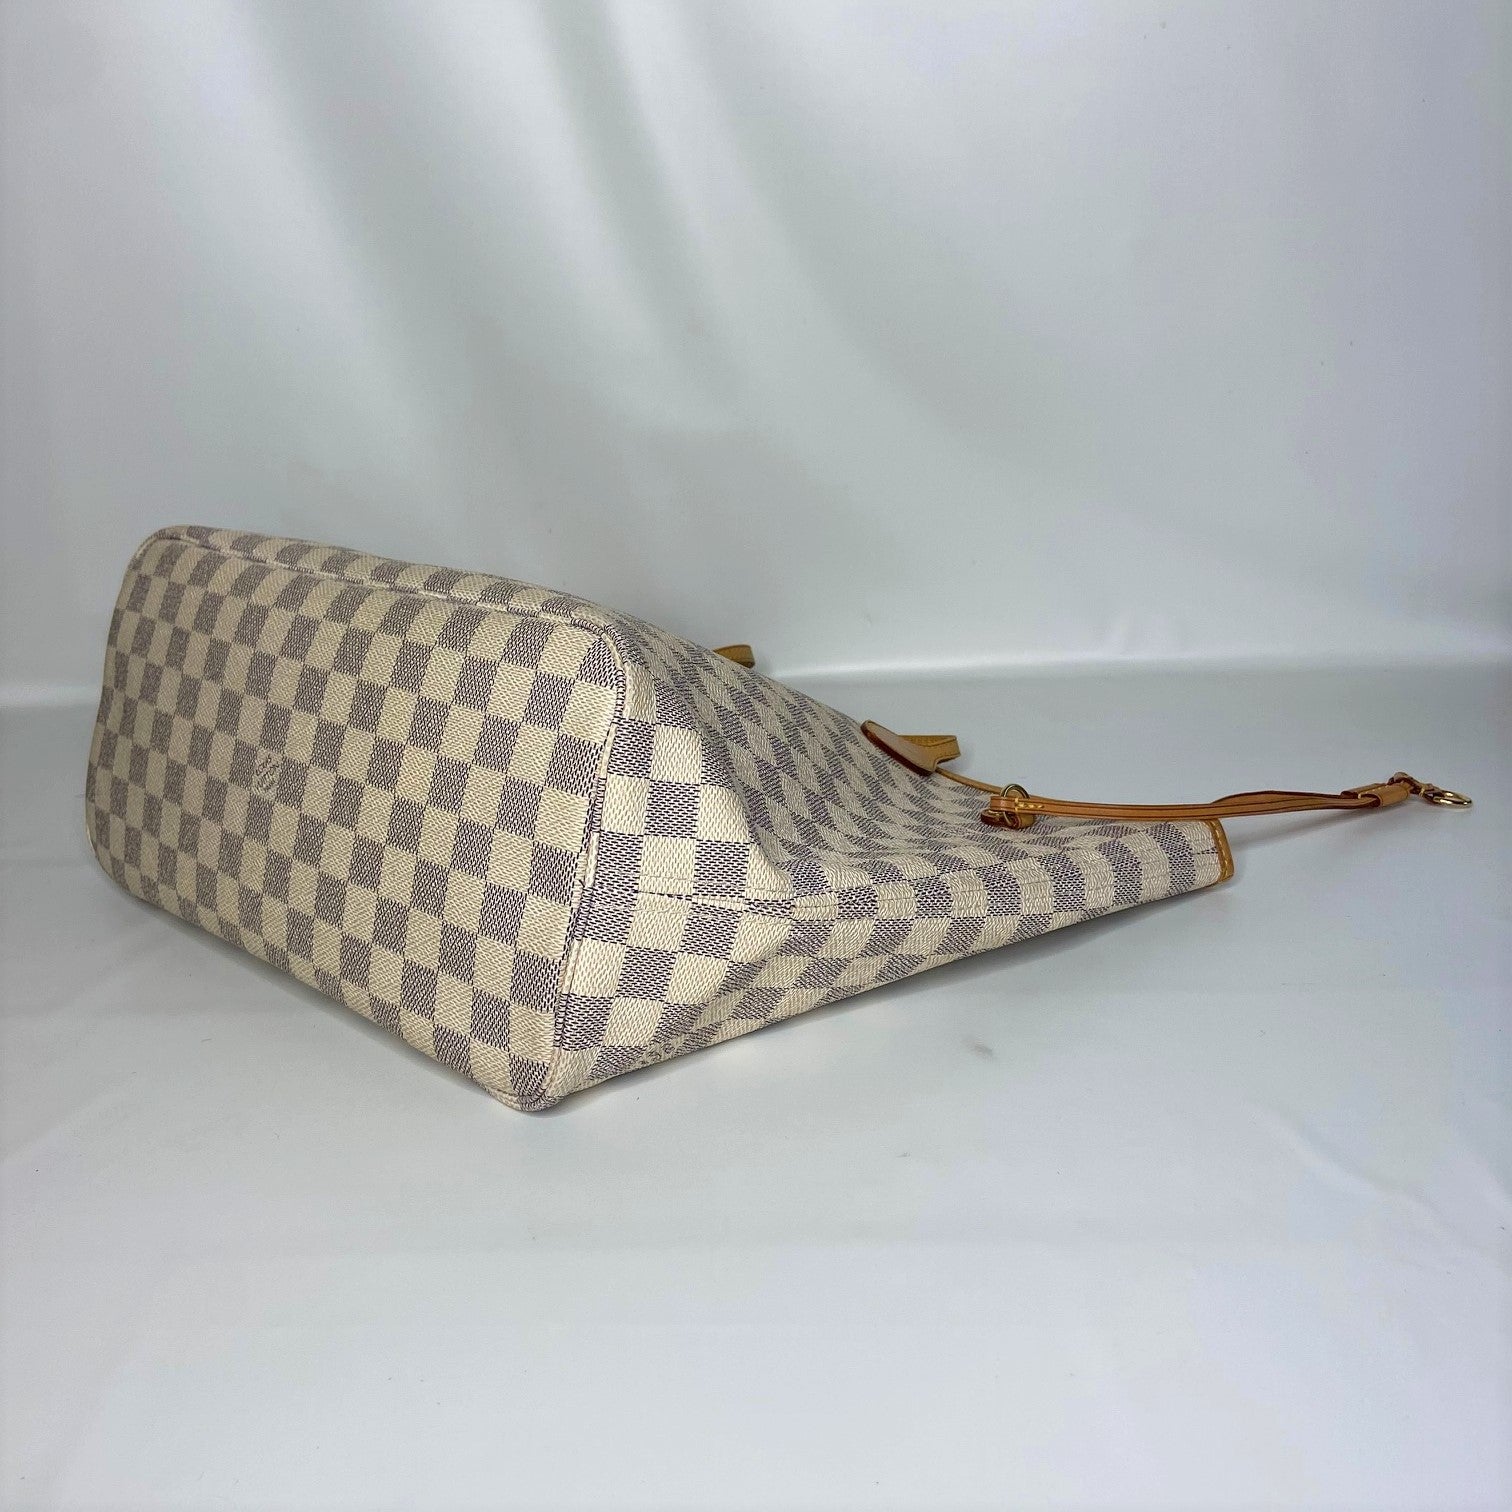 Shop authentic Louis Vuitton Neverfull MM at revogue for just USD